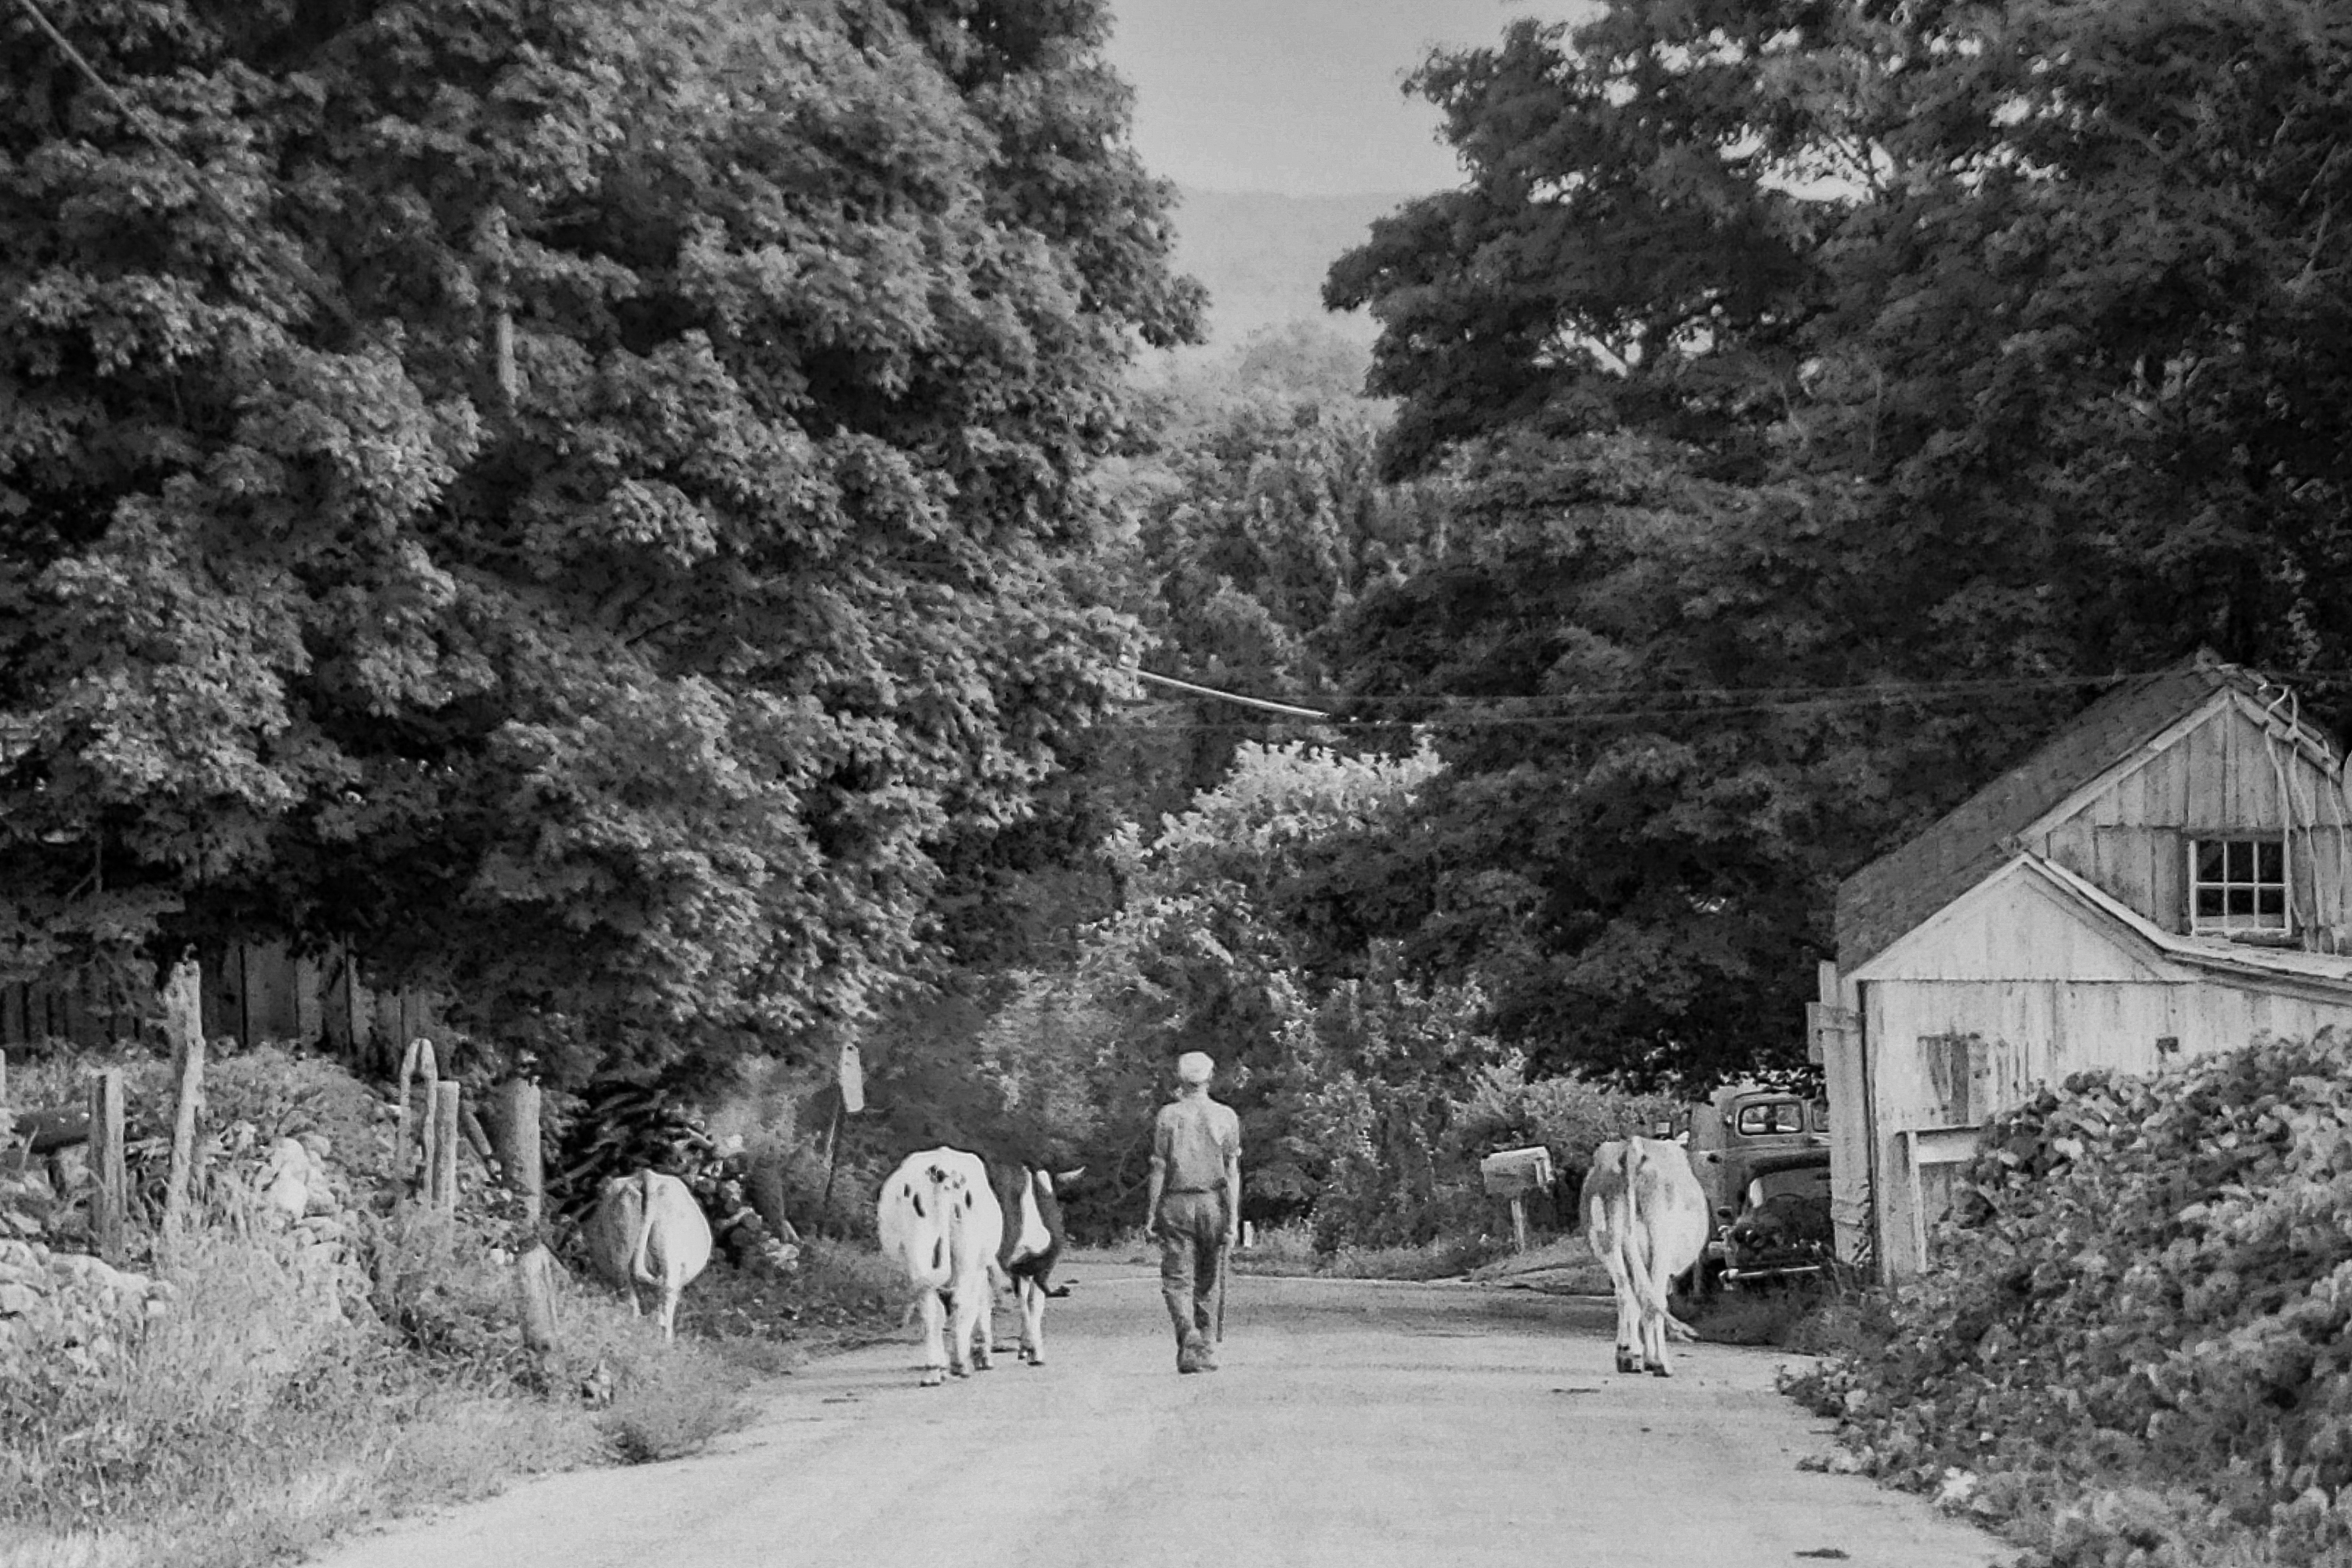 Image of cows on road